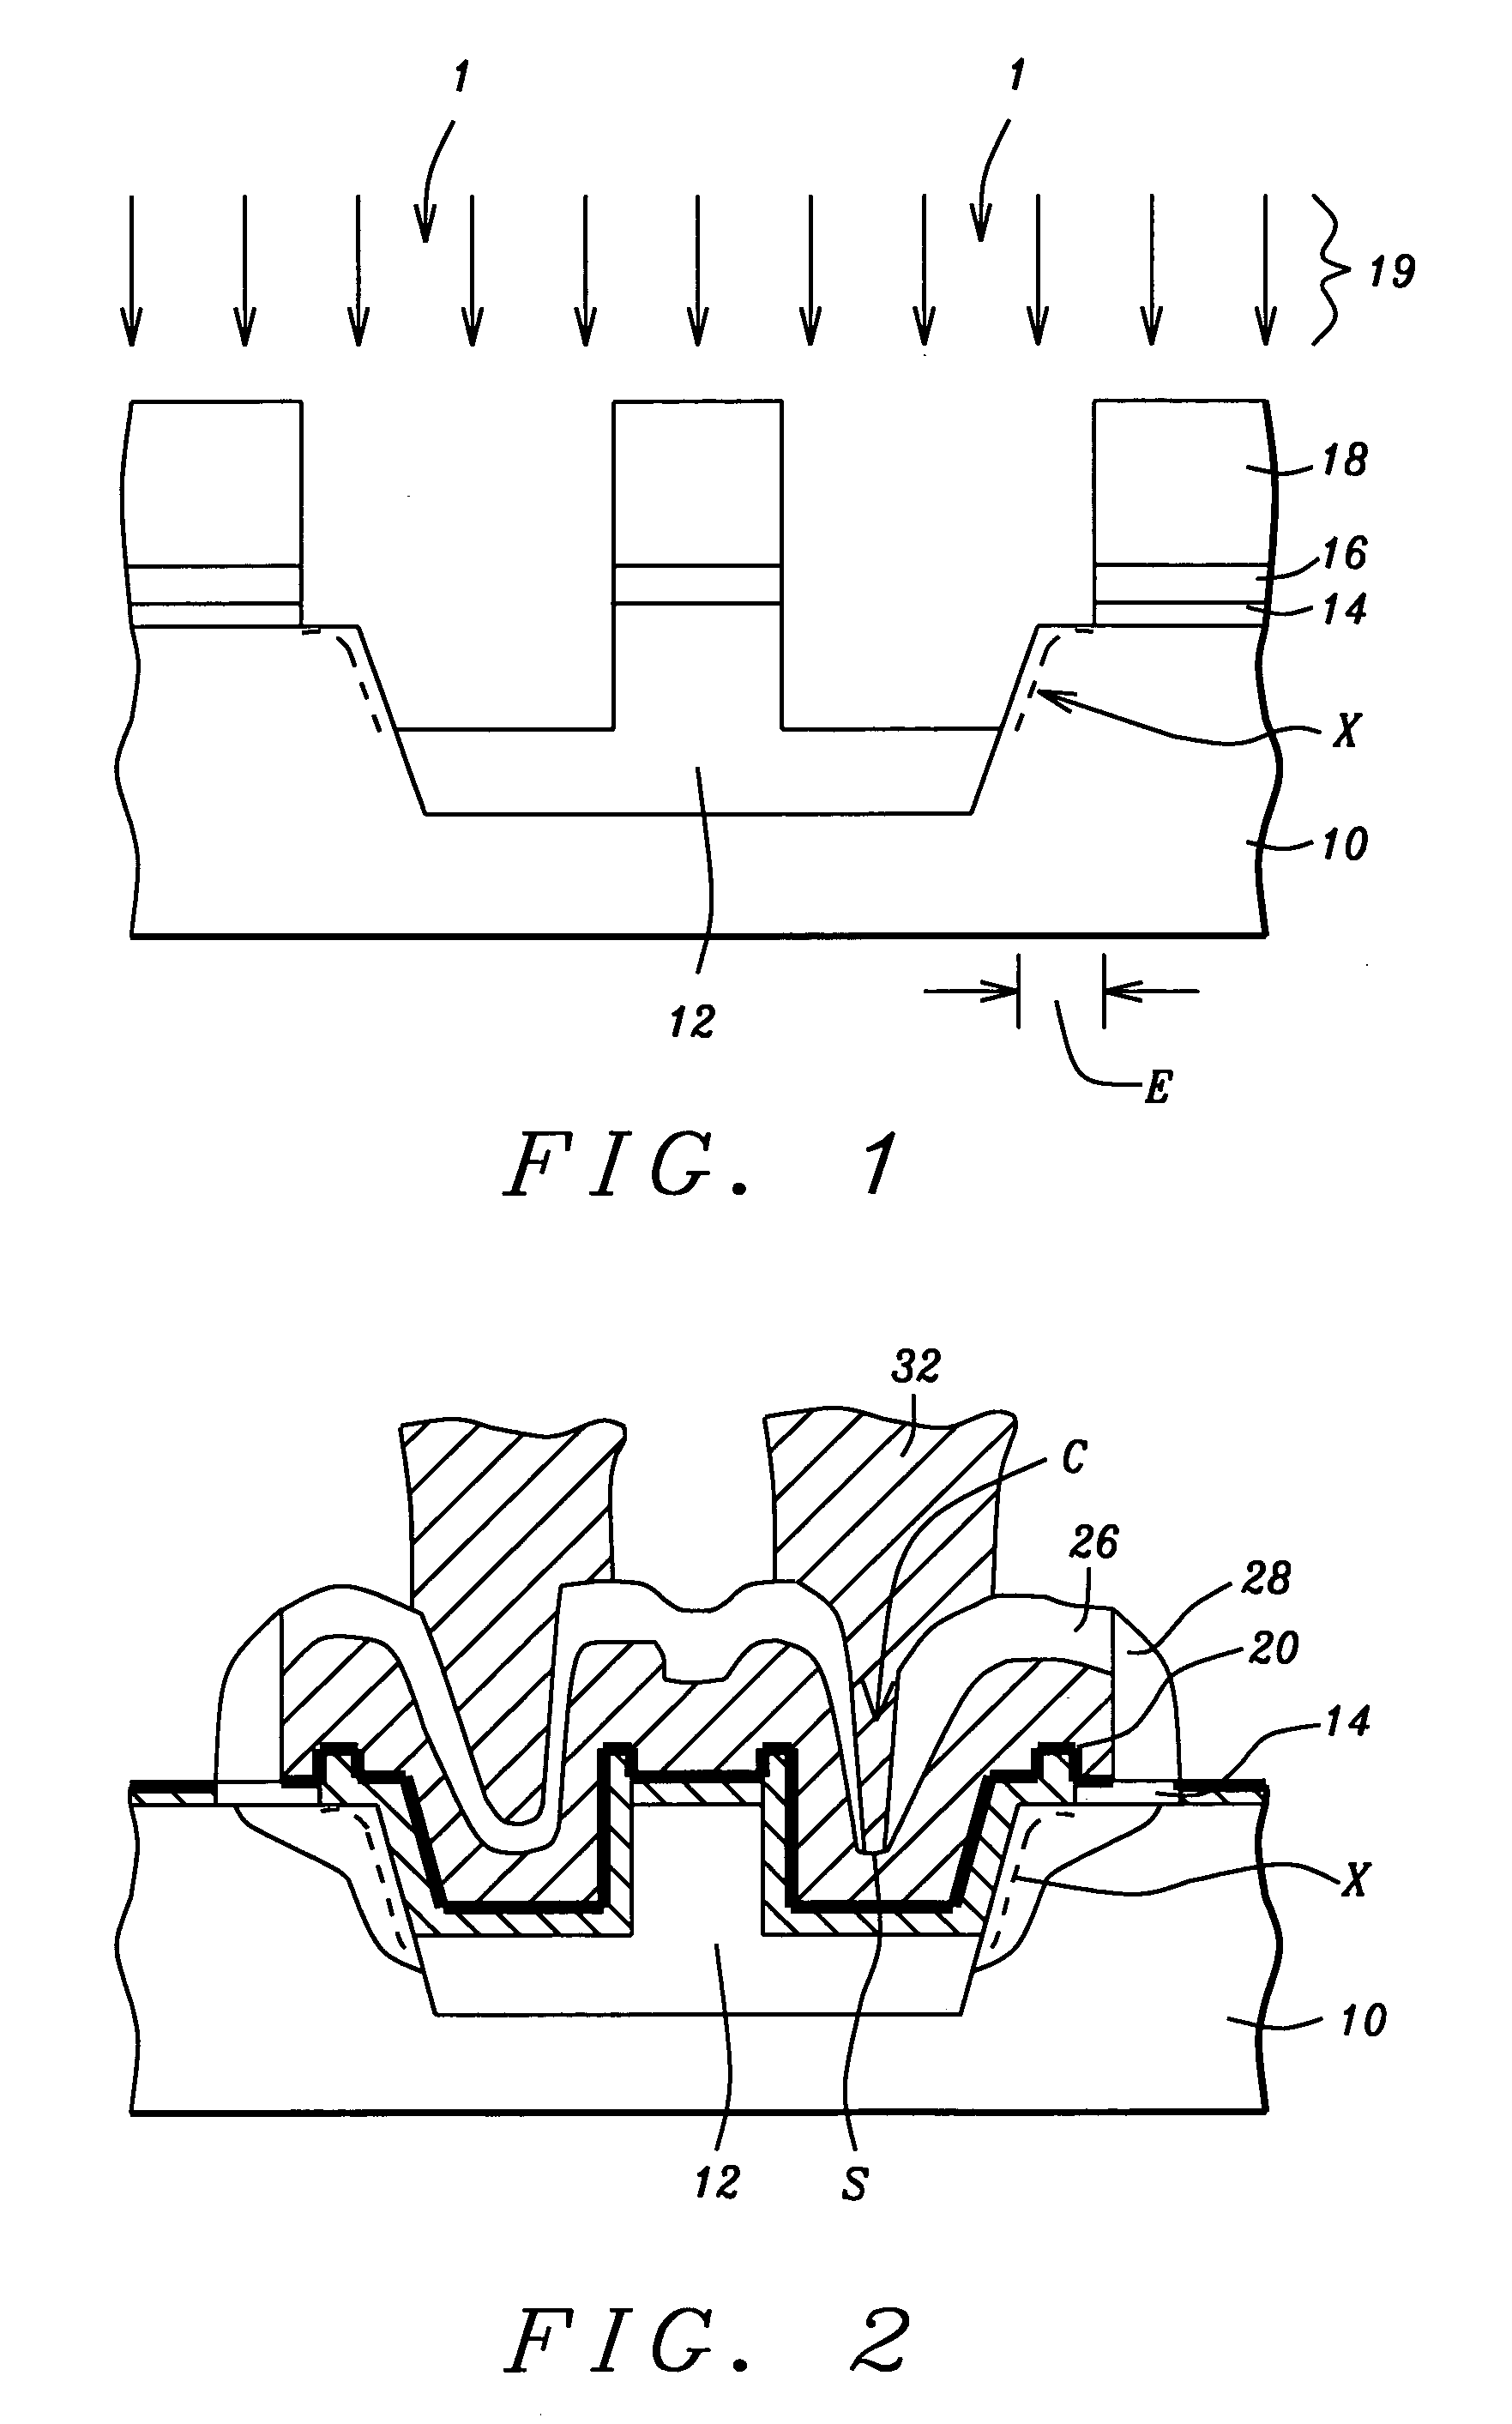 Random access memory (RAM) capacitor in shallow trench isolation with improved electrical isolation to overlying gate electrodes